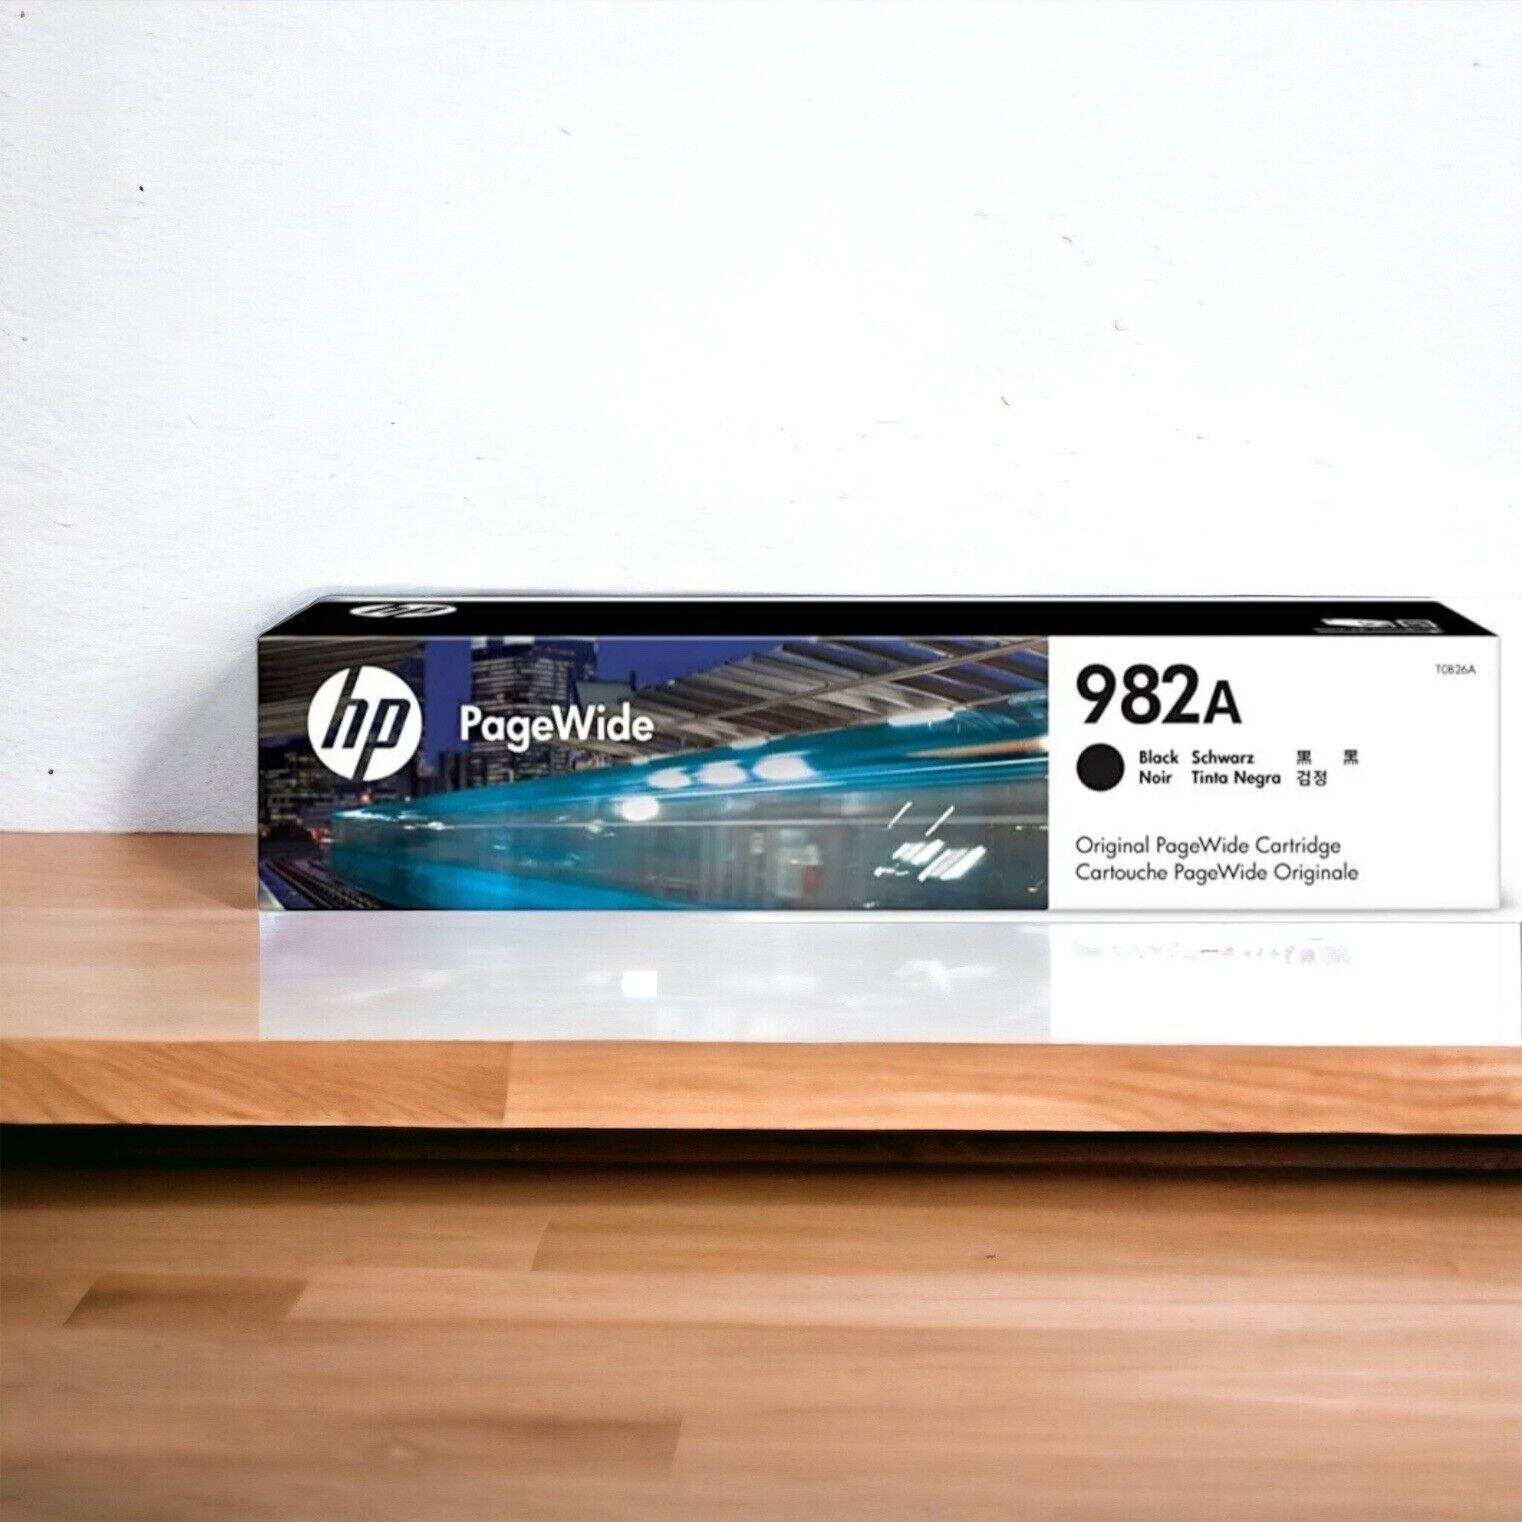 HP 982A Black Original PageWide Cartridge, ~10,000 pages, T0B26A